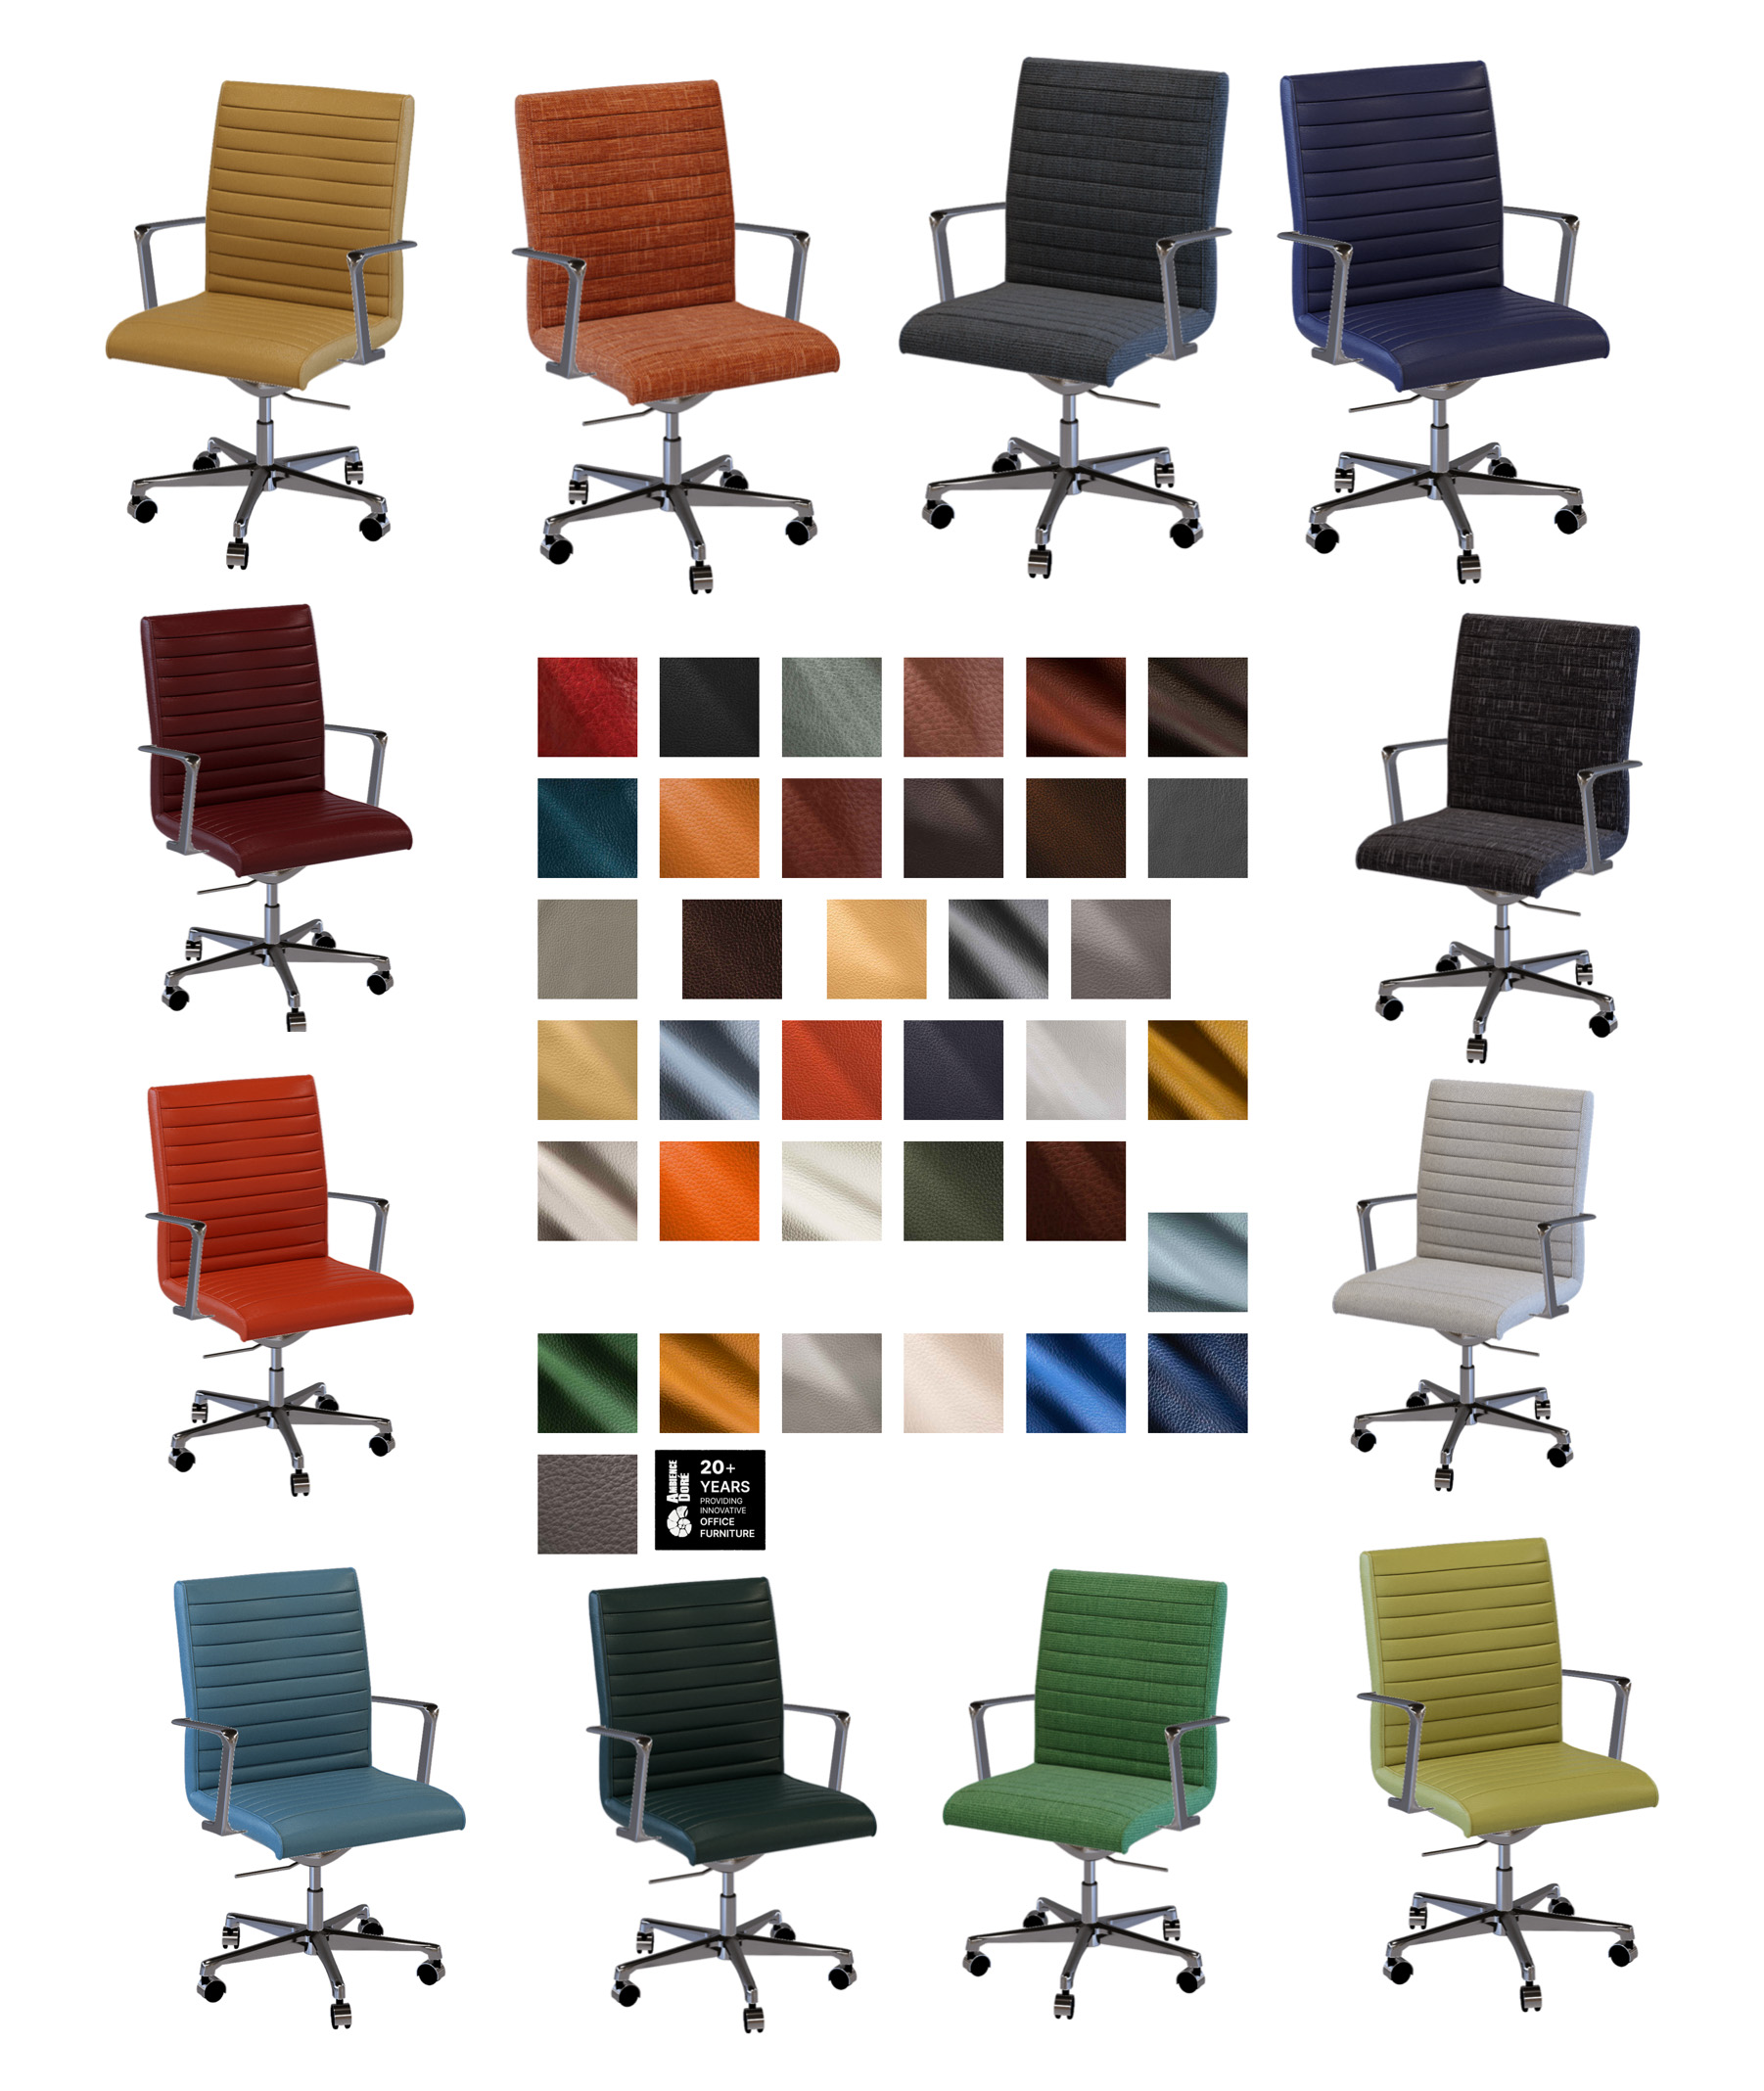 Classic Power Chair colors offer limitless color possiblities